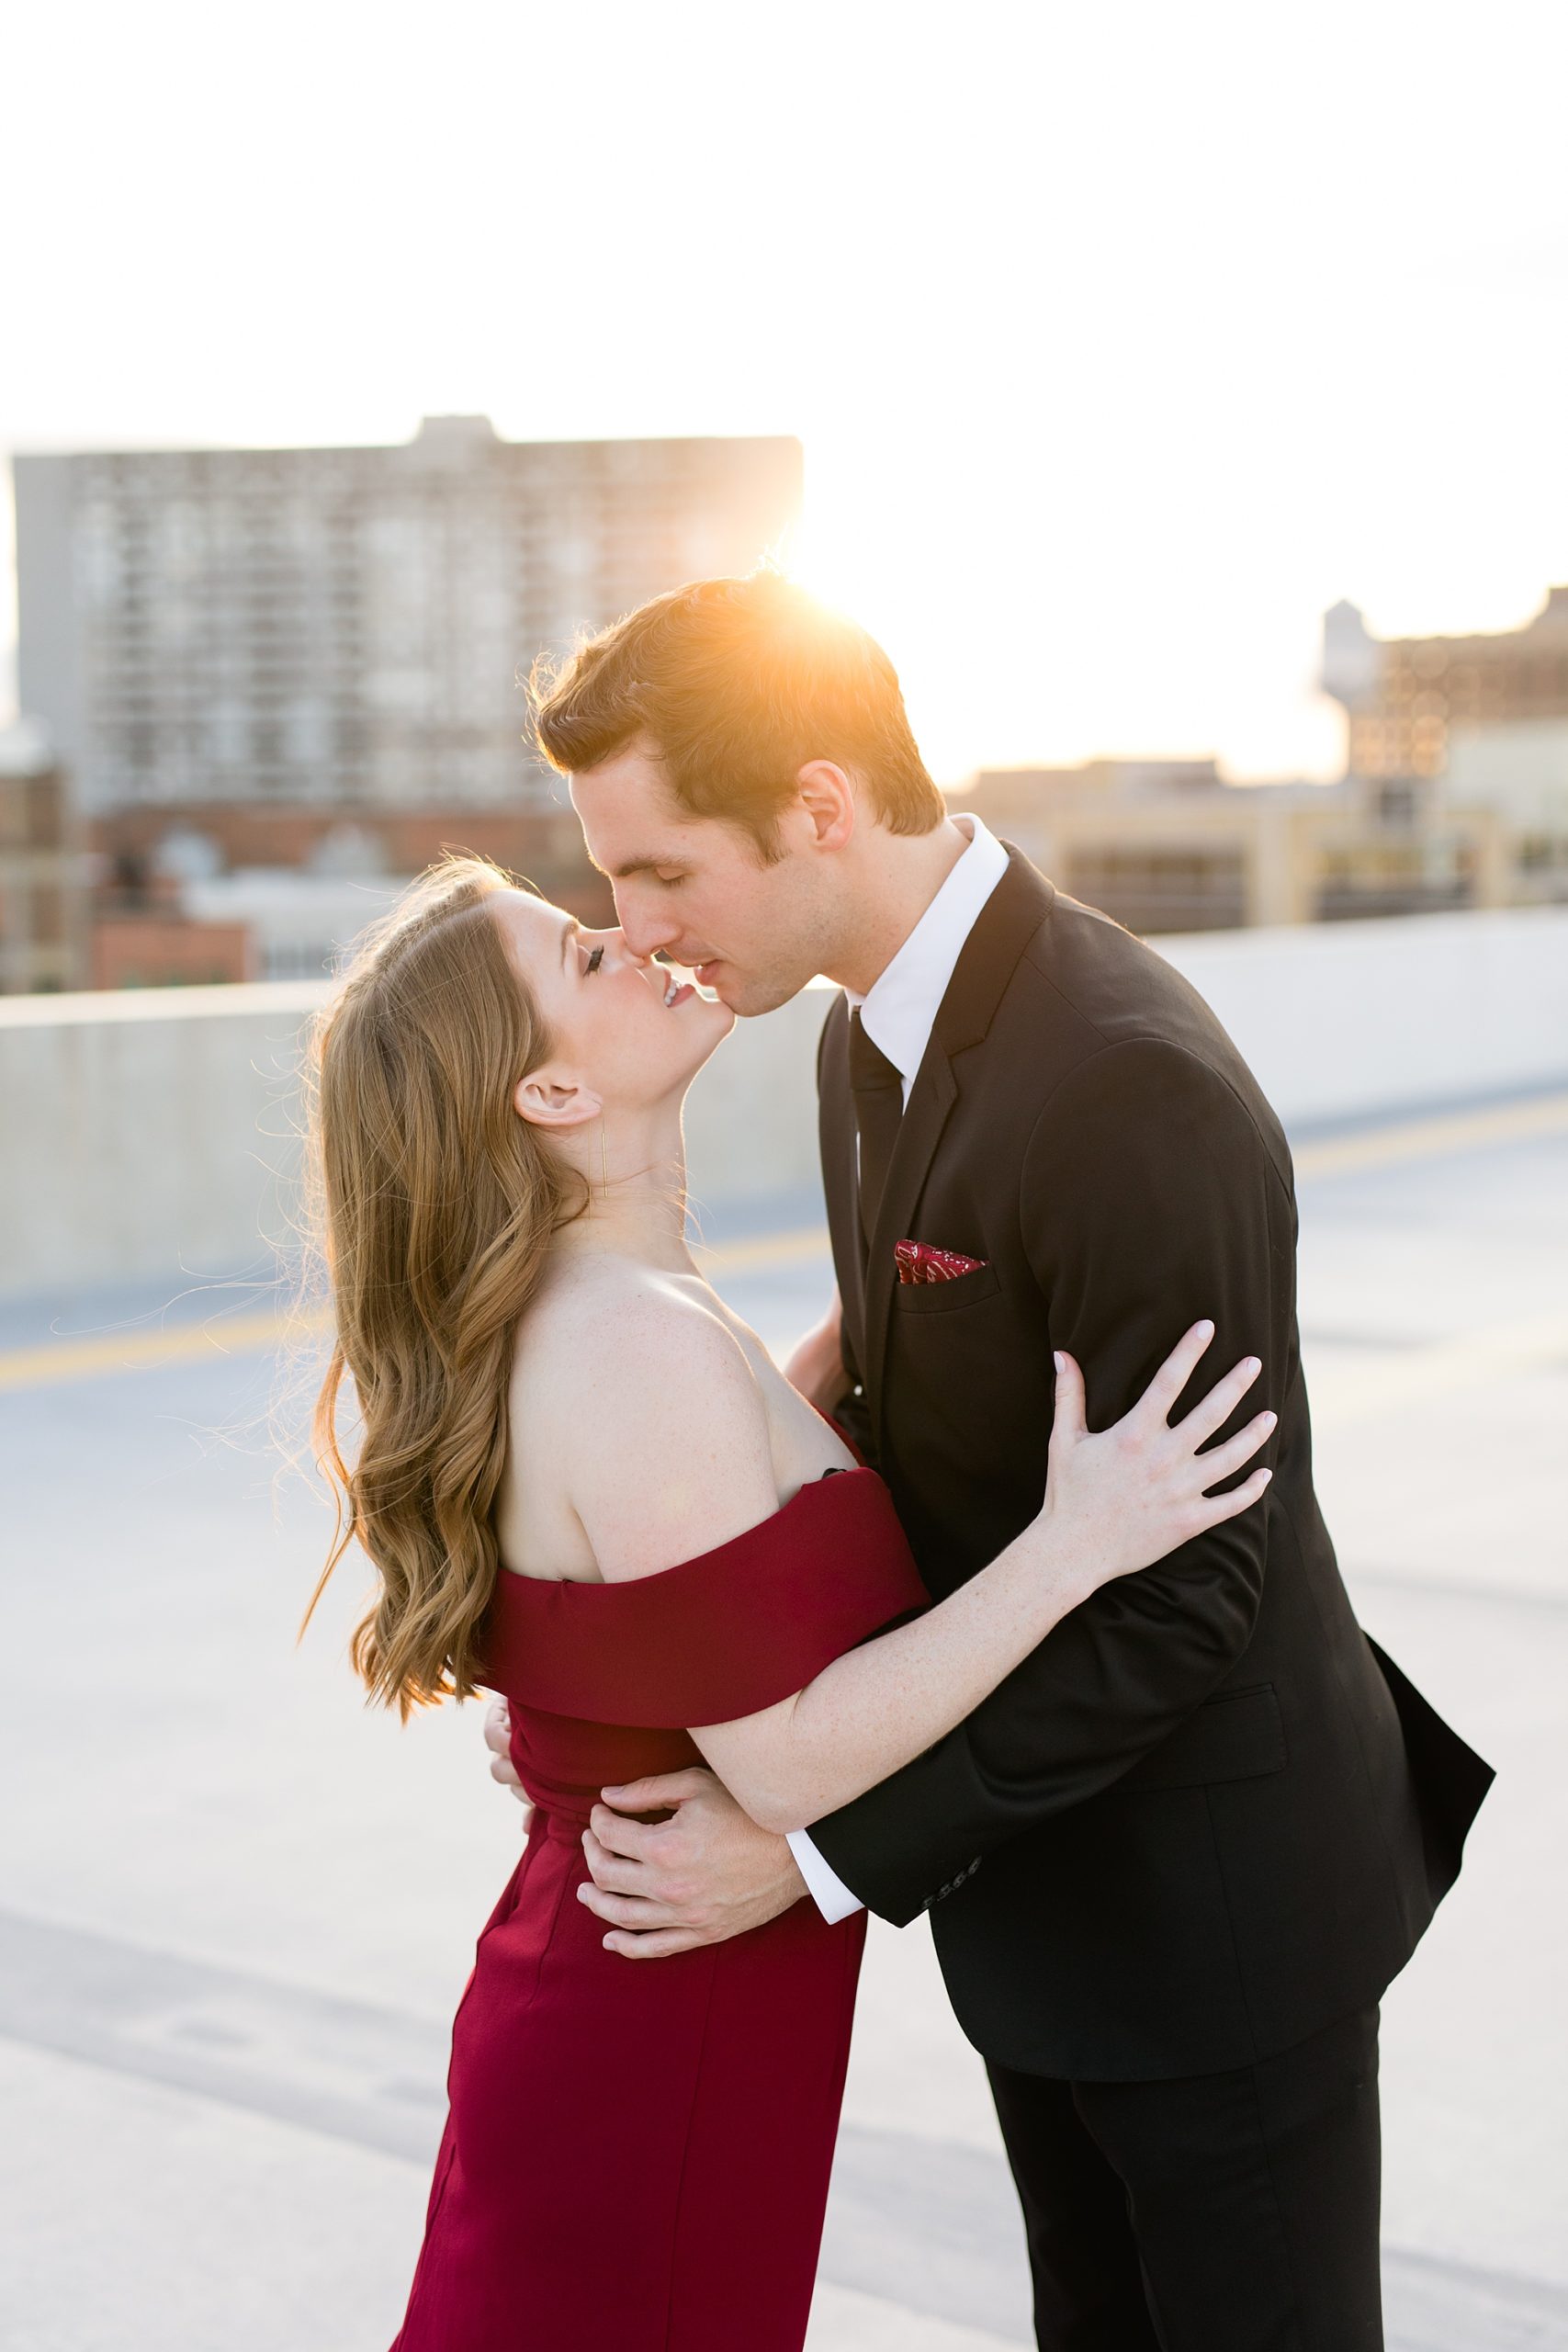 Golden hour glow | Rooftop engagement photos in Detroit | Breanne Rochelle Photography